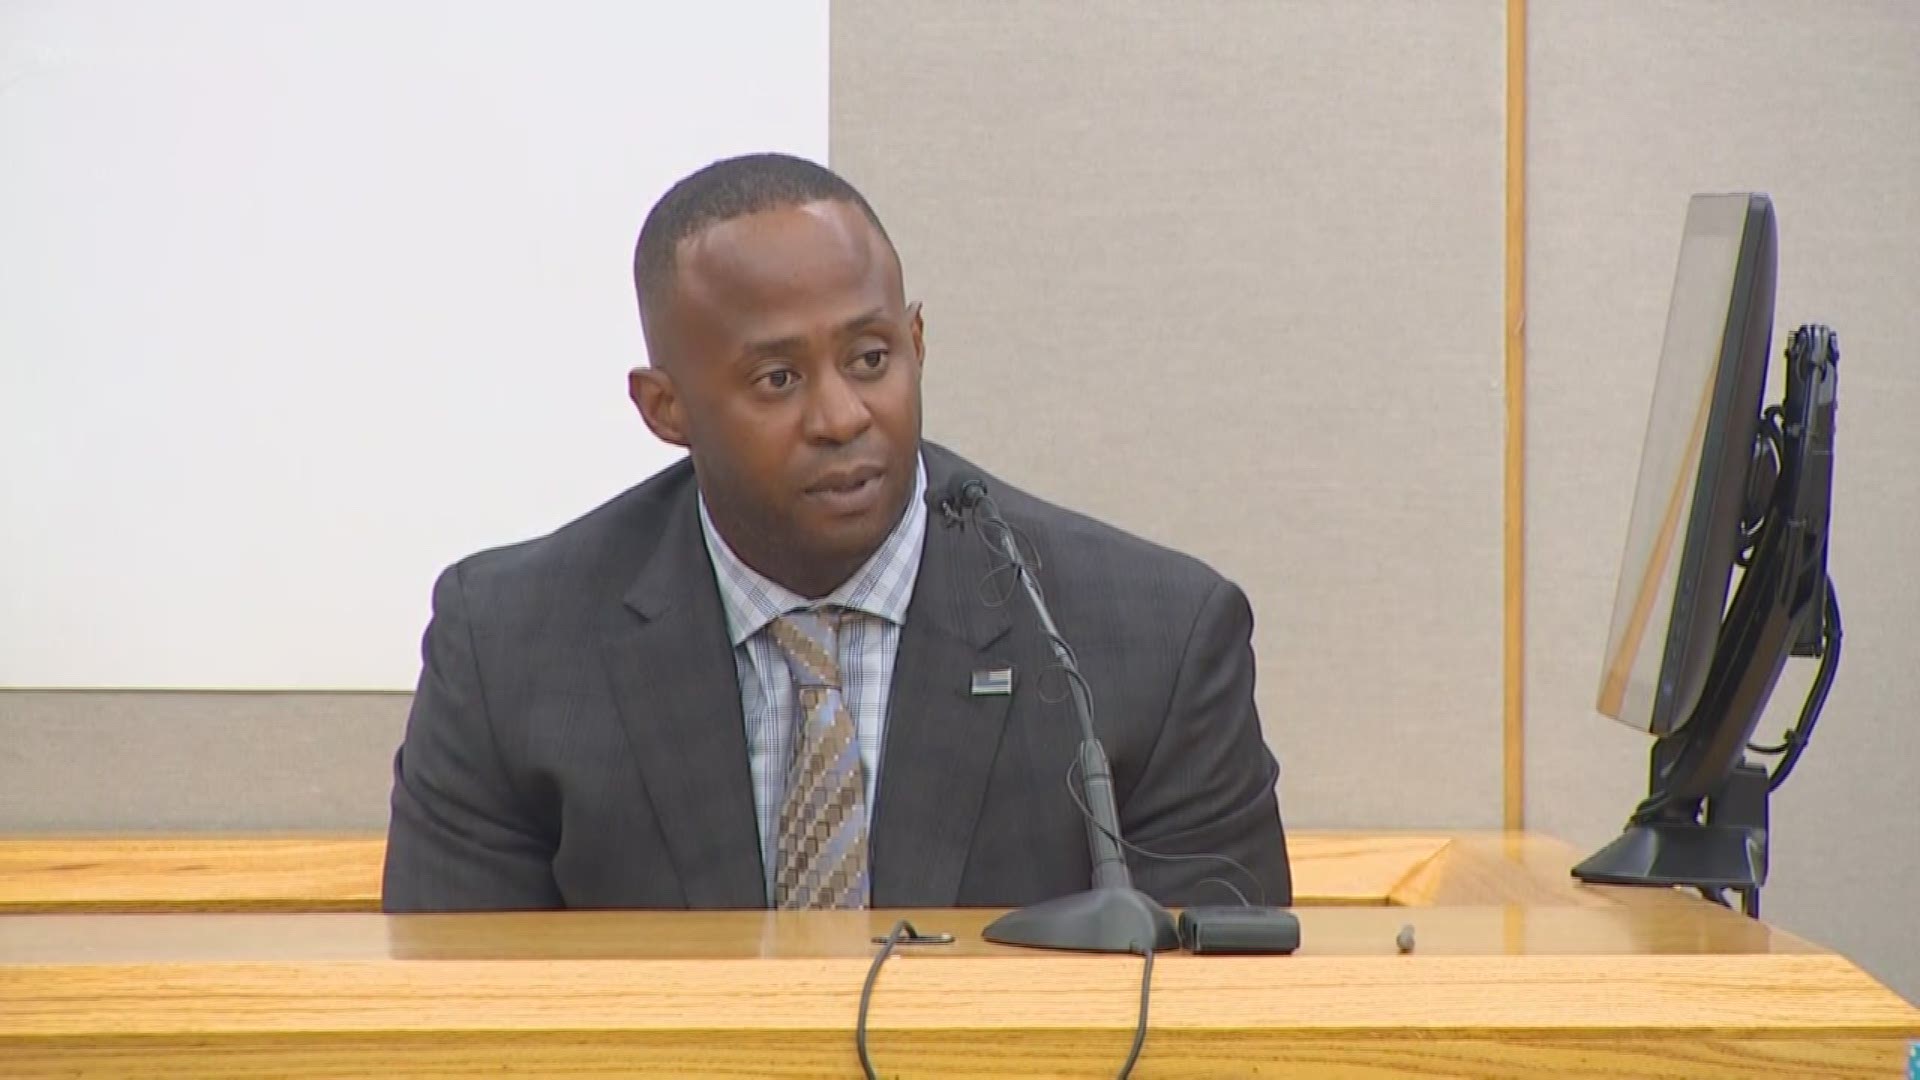 A former Mesquite police officer took the stand to explain to a jury his actions during an officer involved shooting that happened in November 2017.